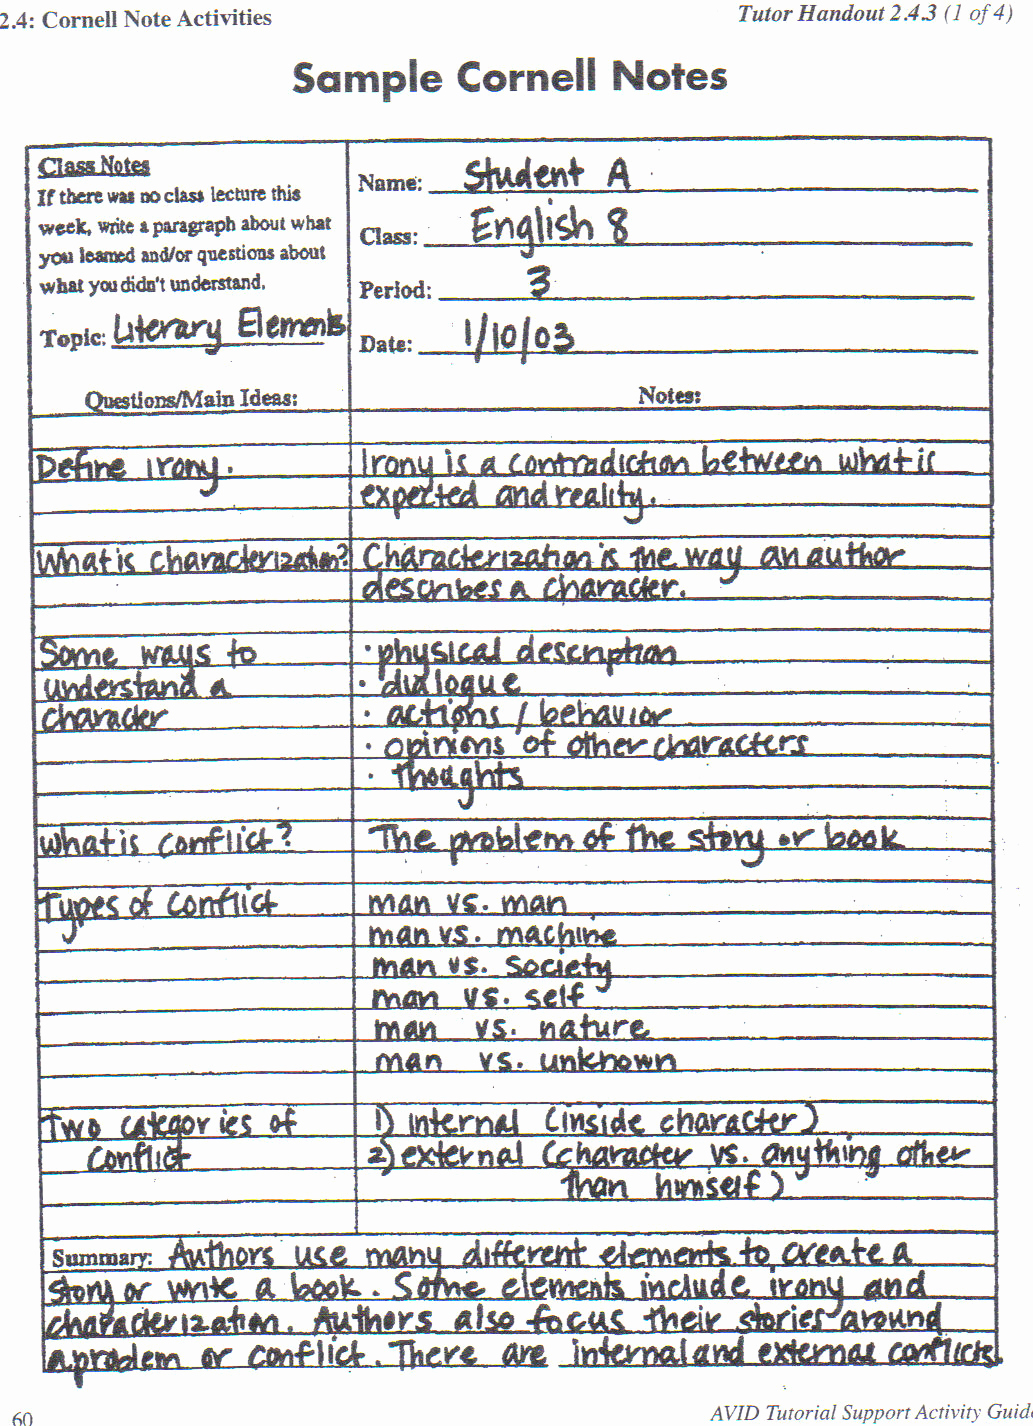 Cornell Notes Template Google Docs Best Of Cornell Notes Sample 1ridgeview High School